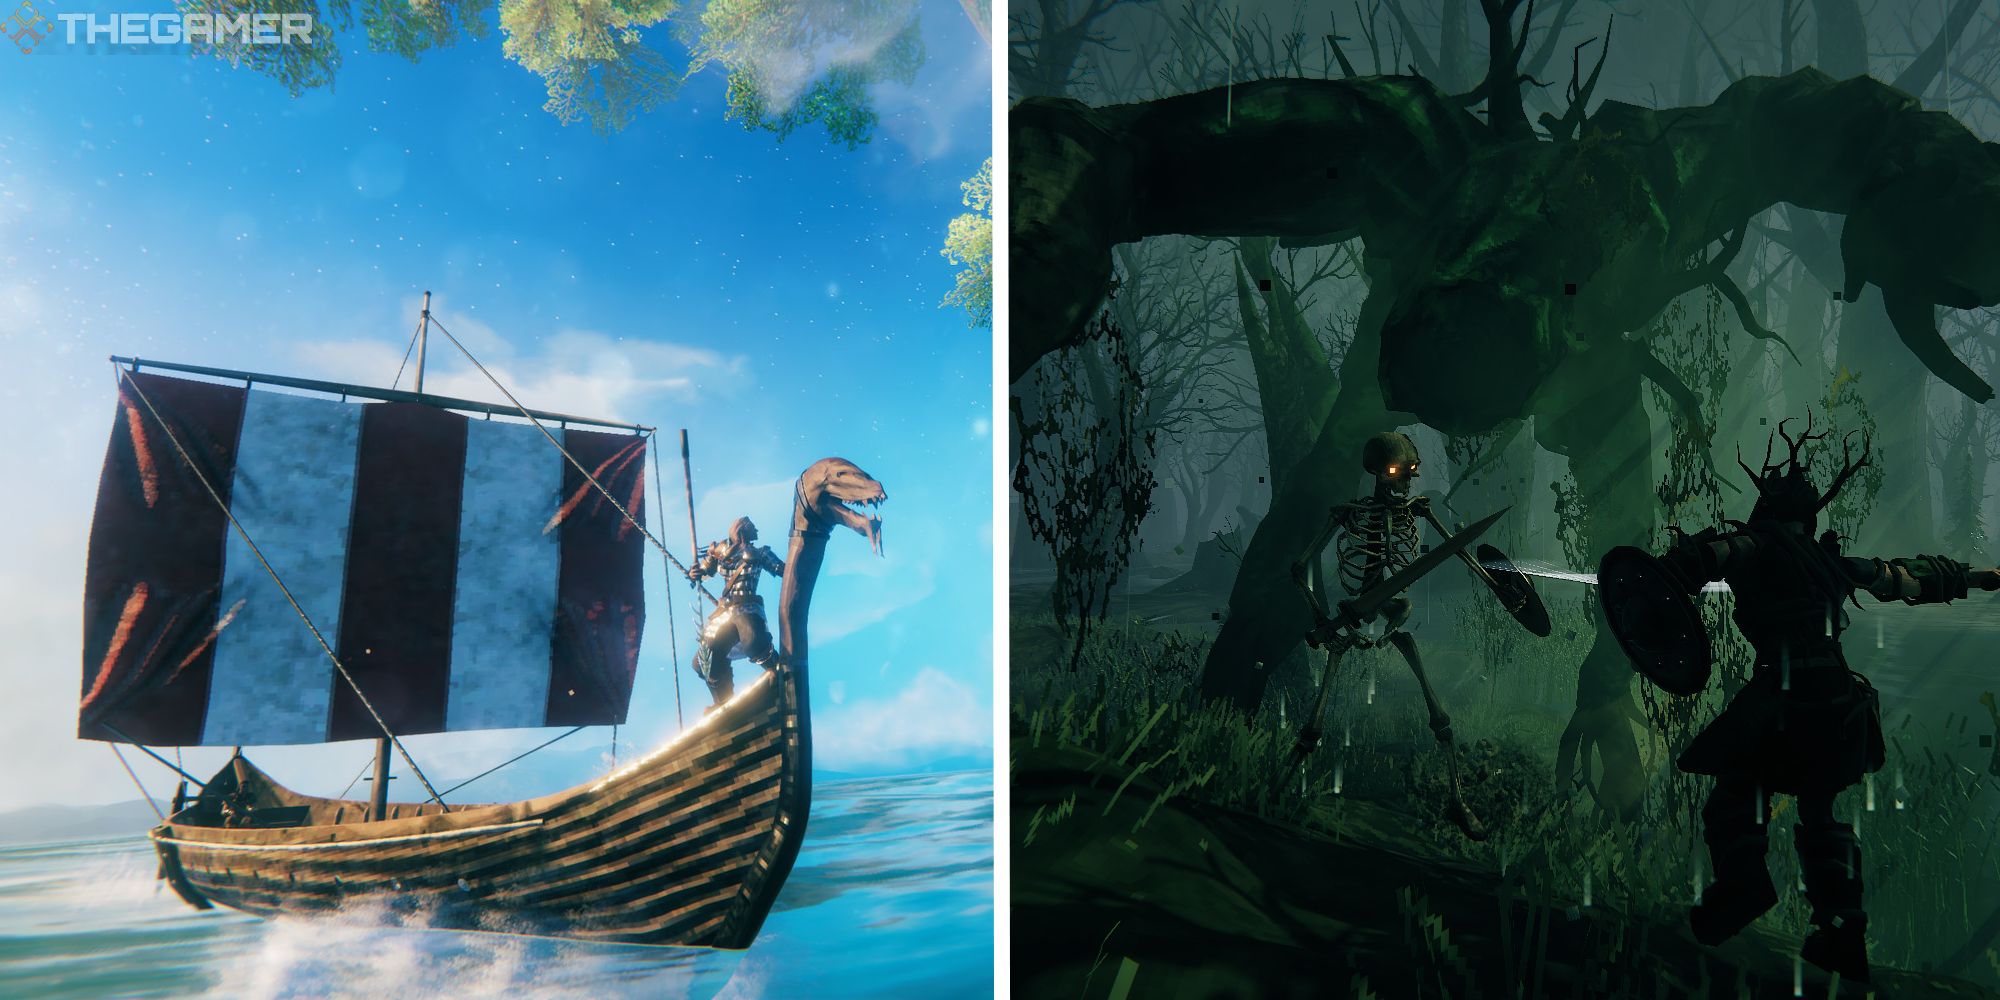 split image showing player sailing next to image of player fighting in the swamp biome